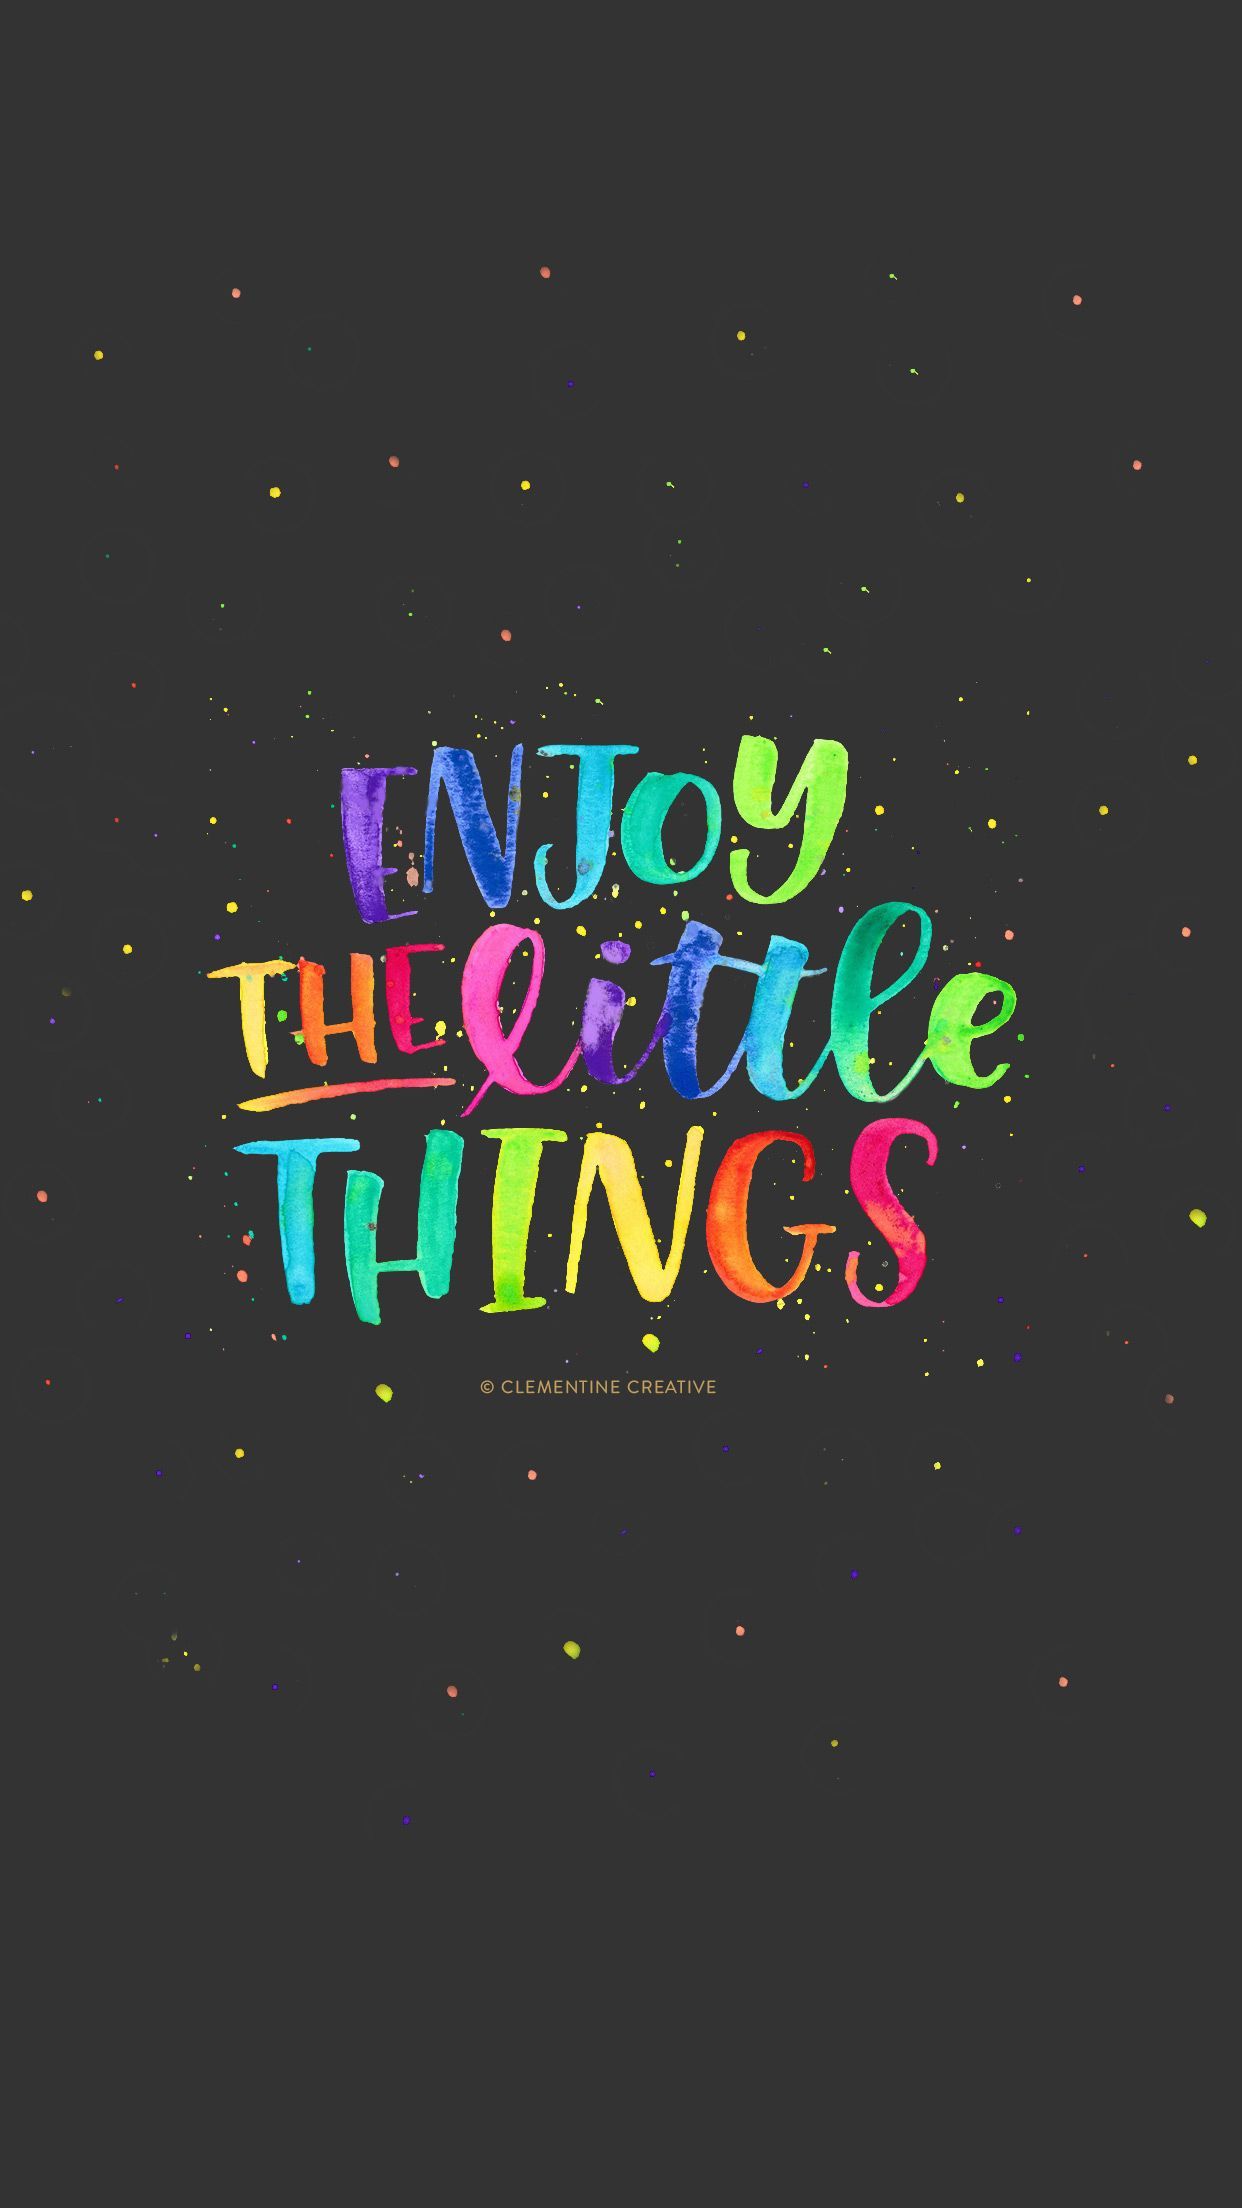 Free Wallpaper: Enjoy the Little Things. Wallpaper quotes, Rainbow quote, Inspirational quotes